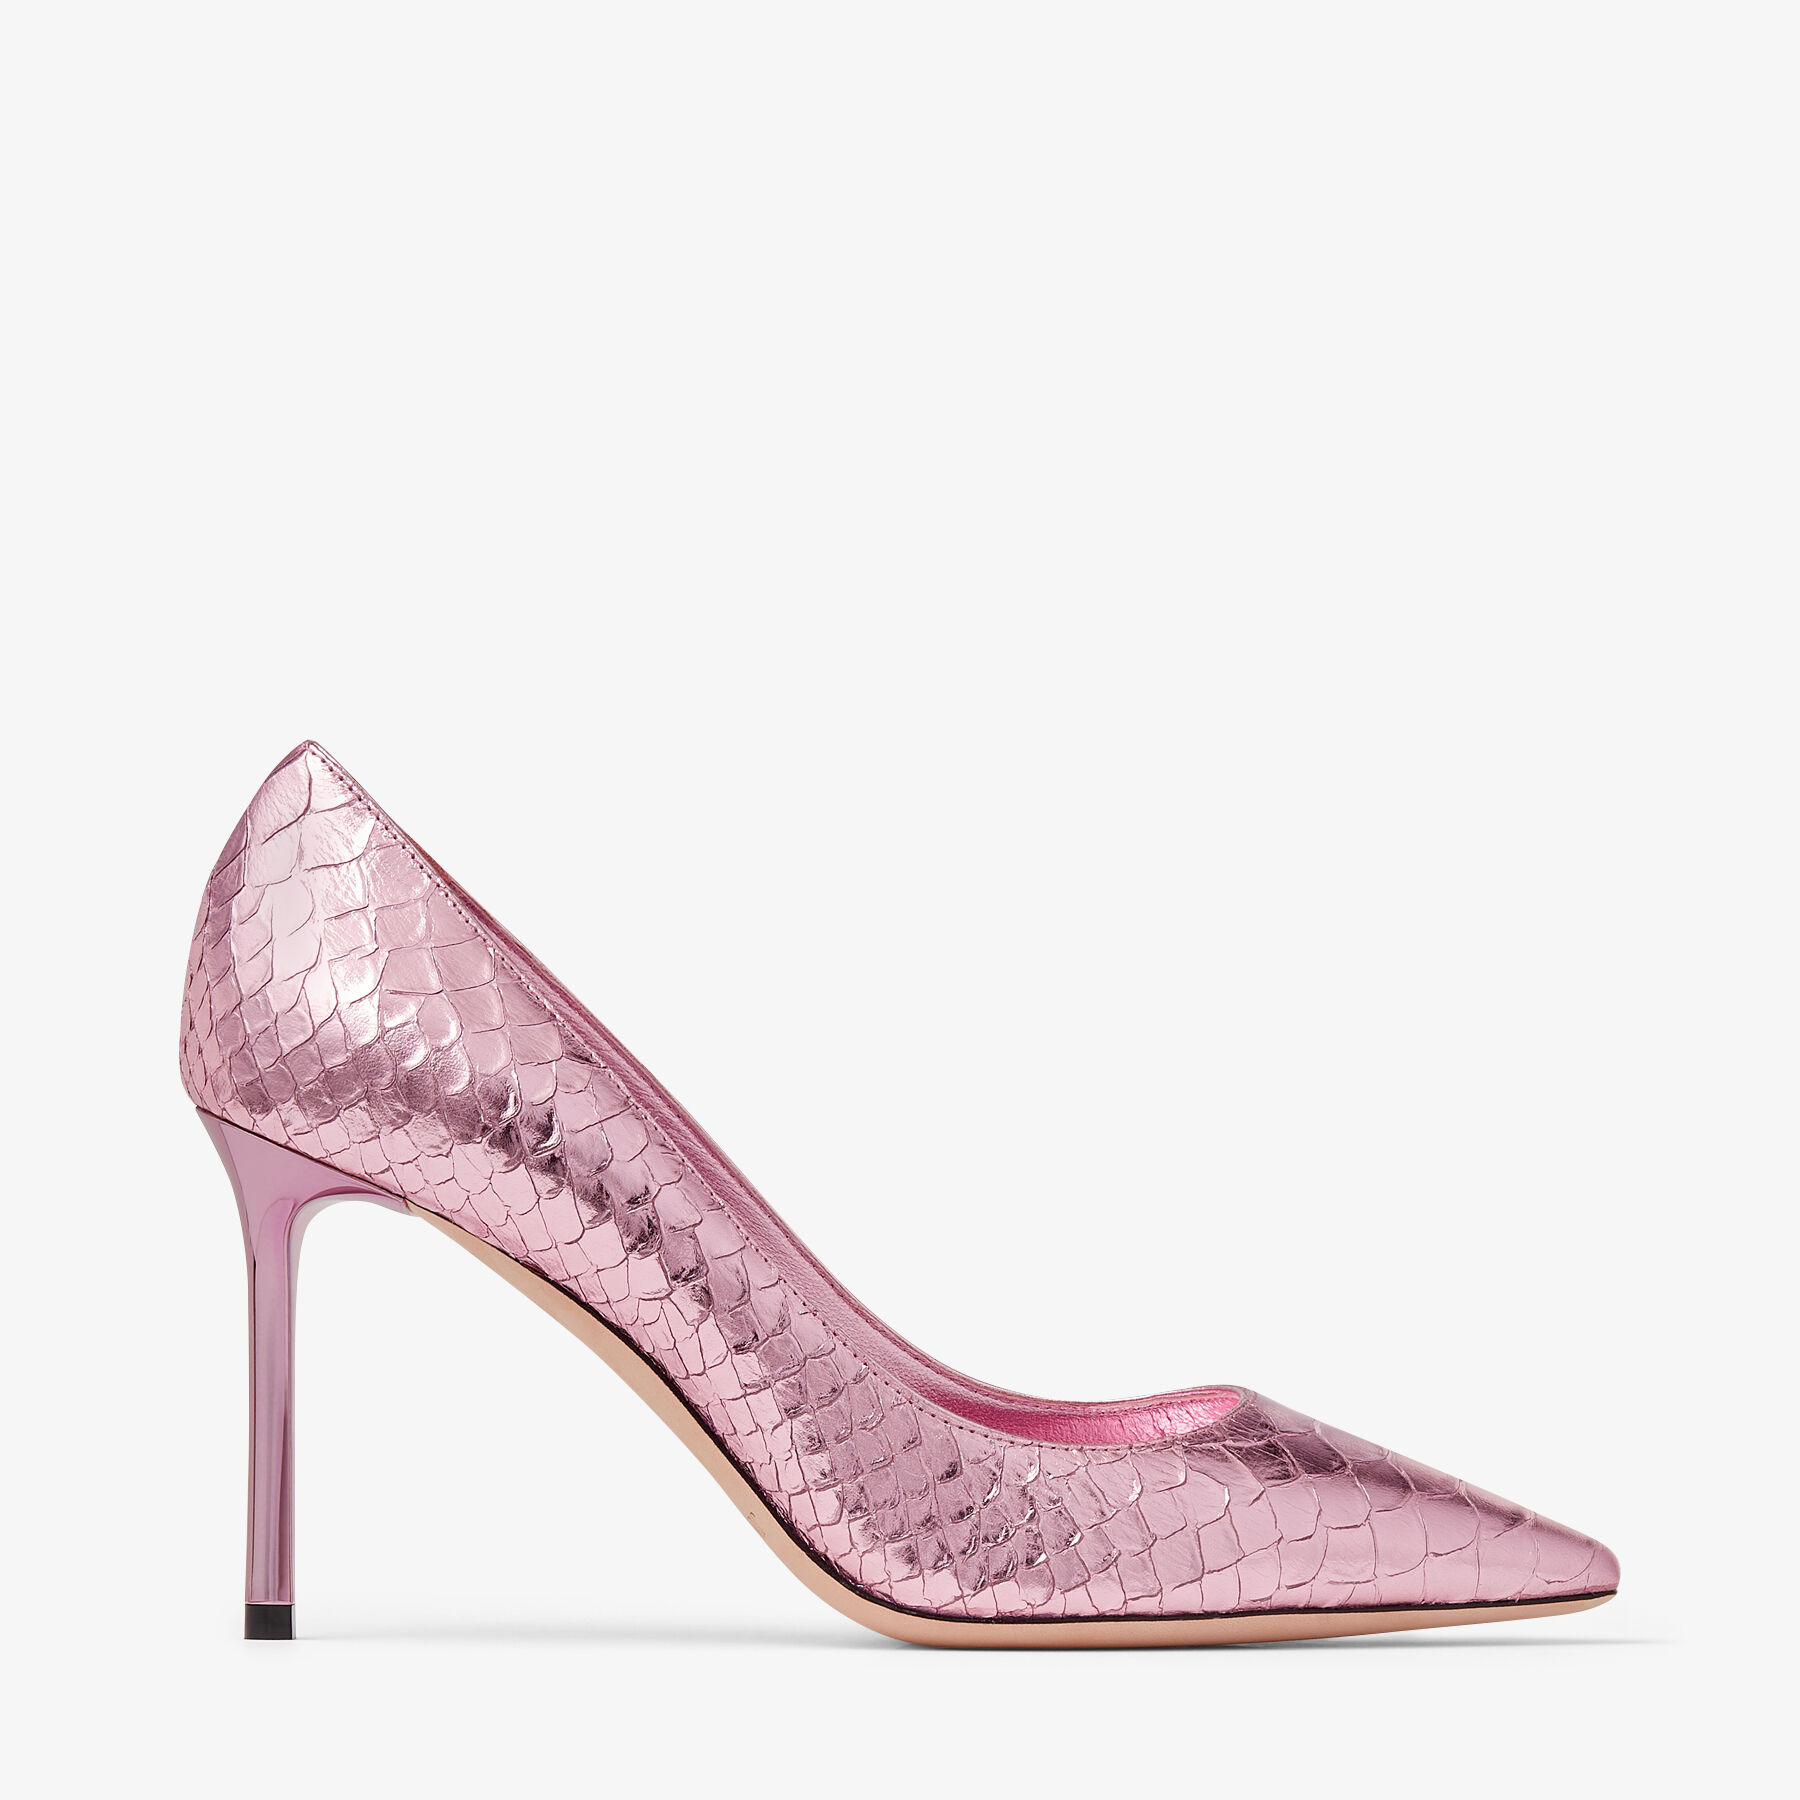 Romy 85 | Candy Pink Metallic Snake Printed Leather Pumps | JIMMY